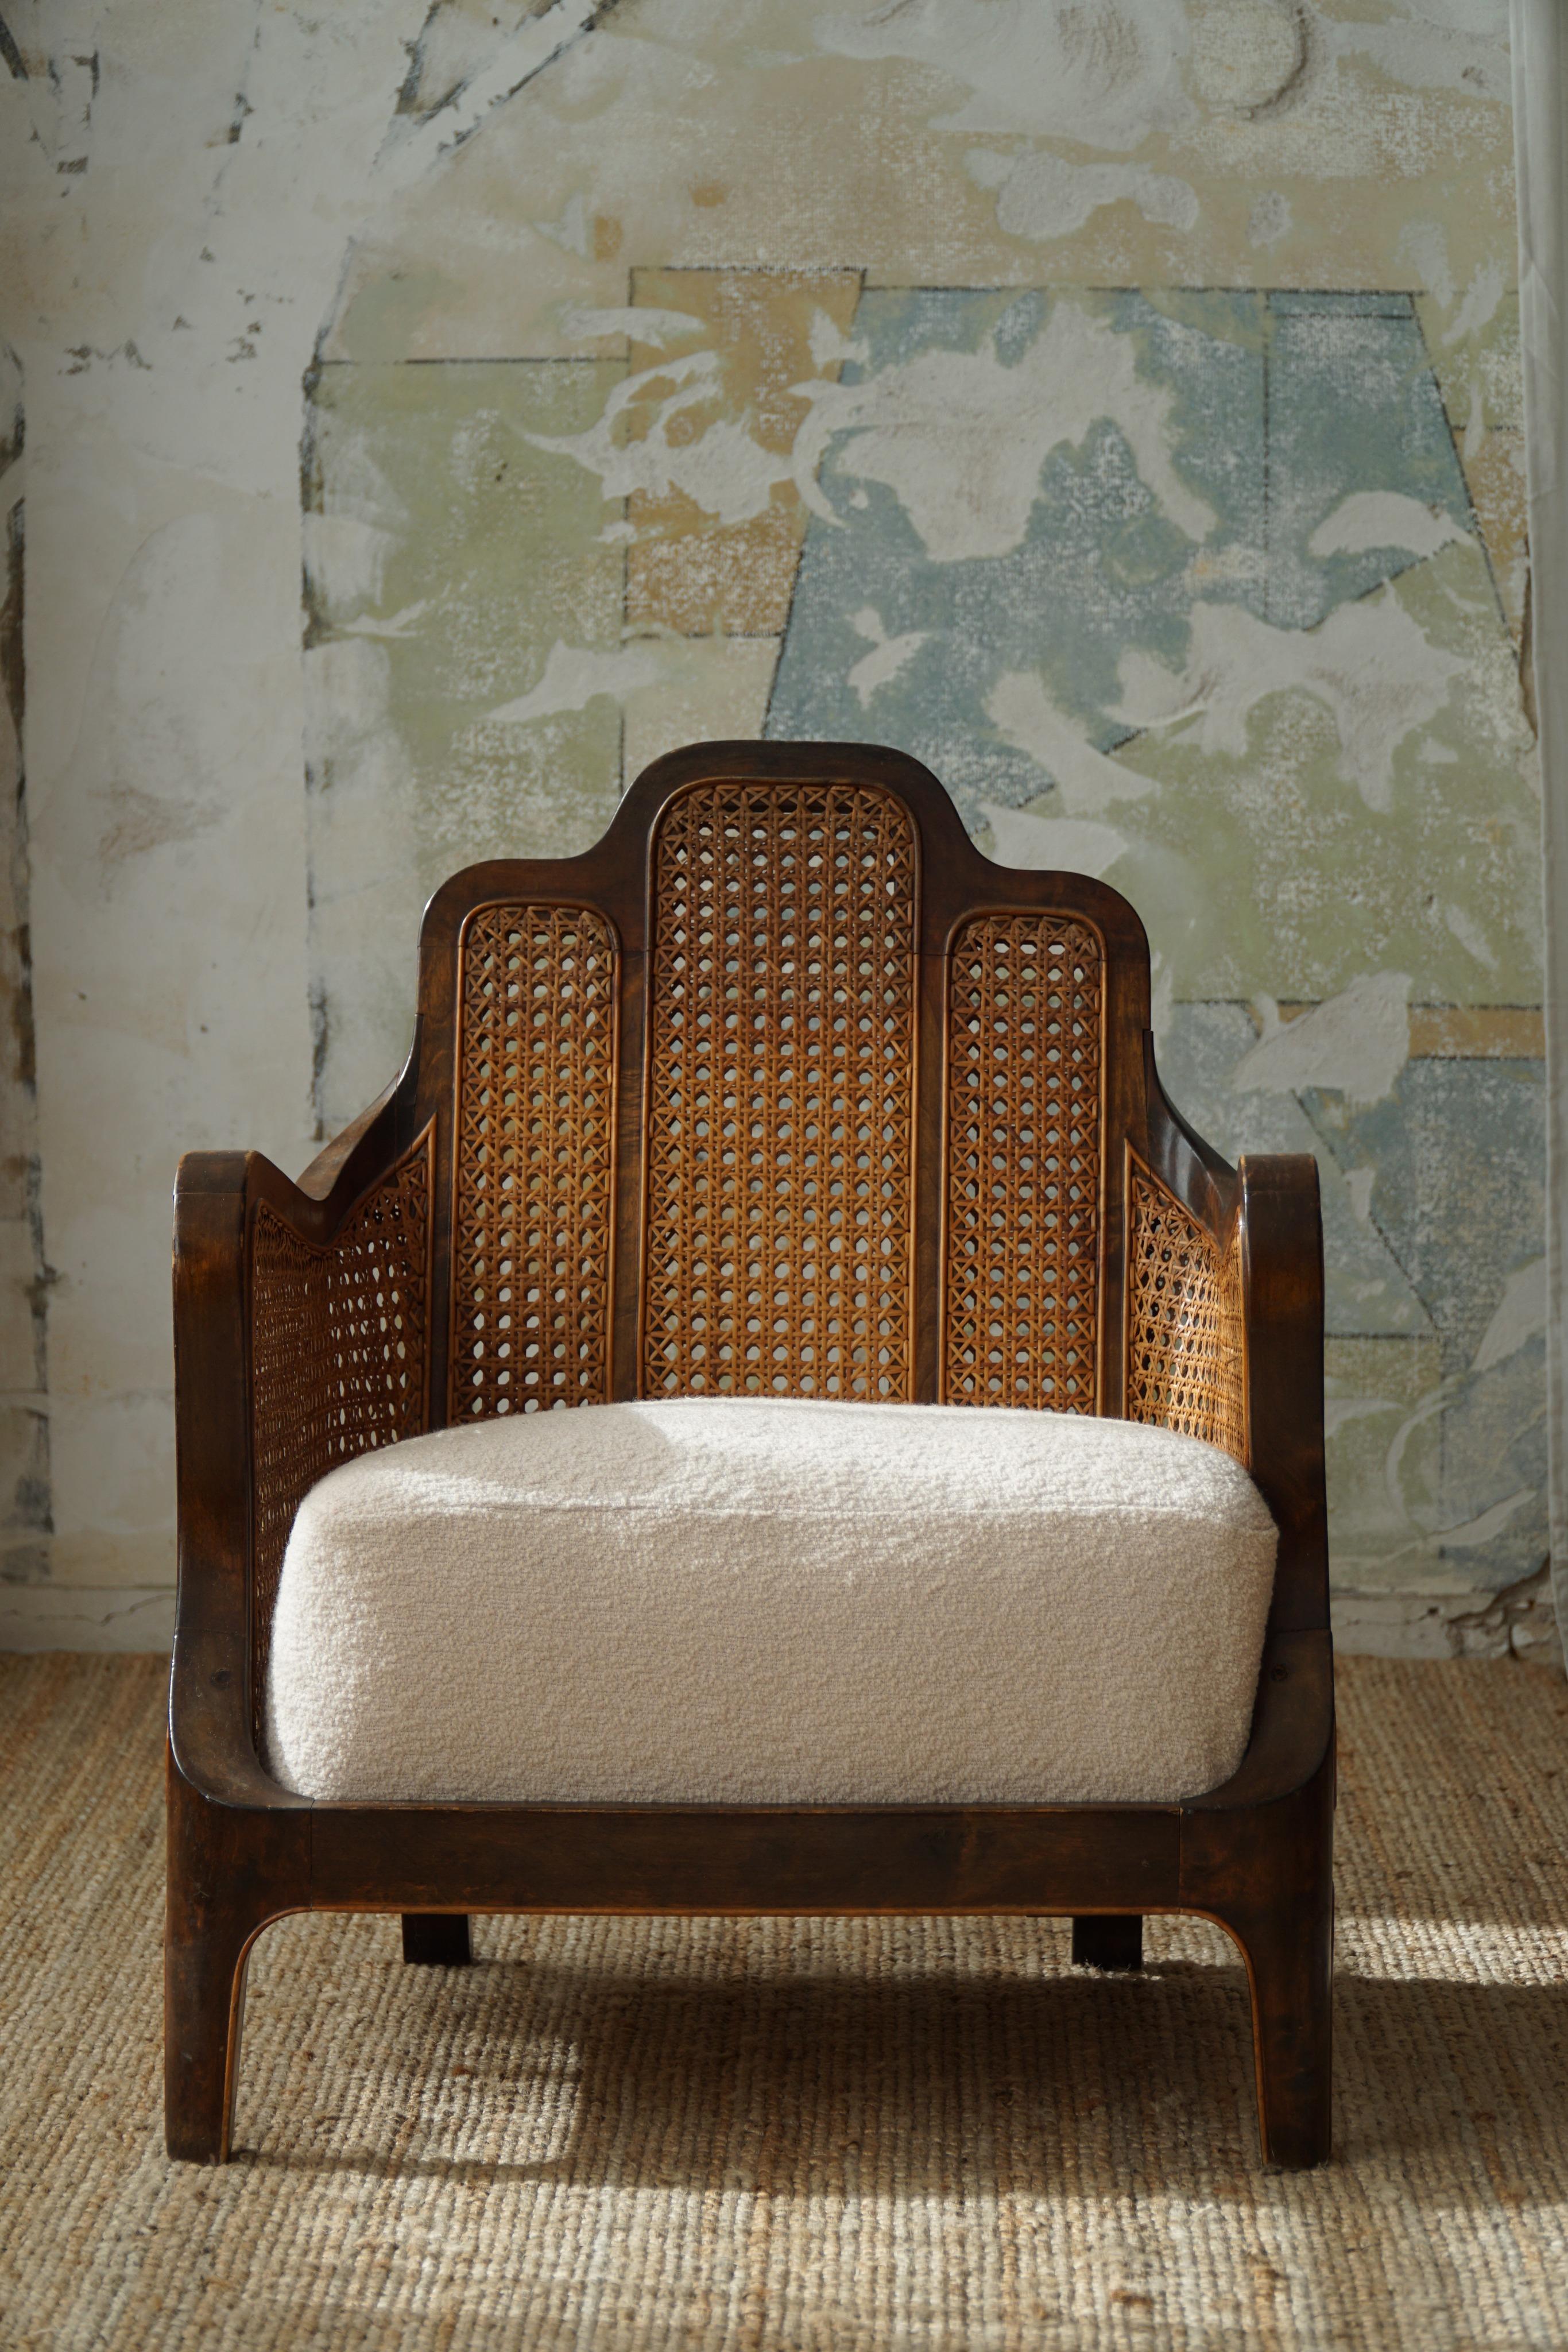 Antique 19th Century Lounge Chair in Rattan, Bouclé & Beech, British Colonial 5